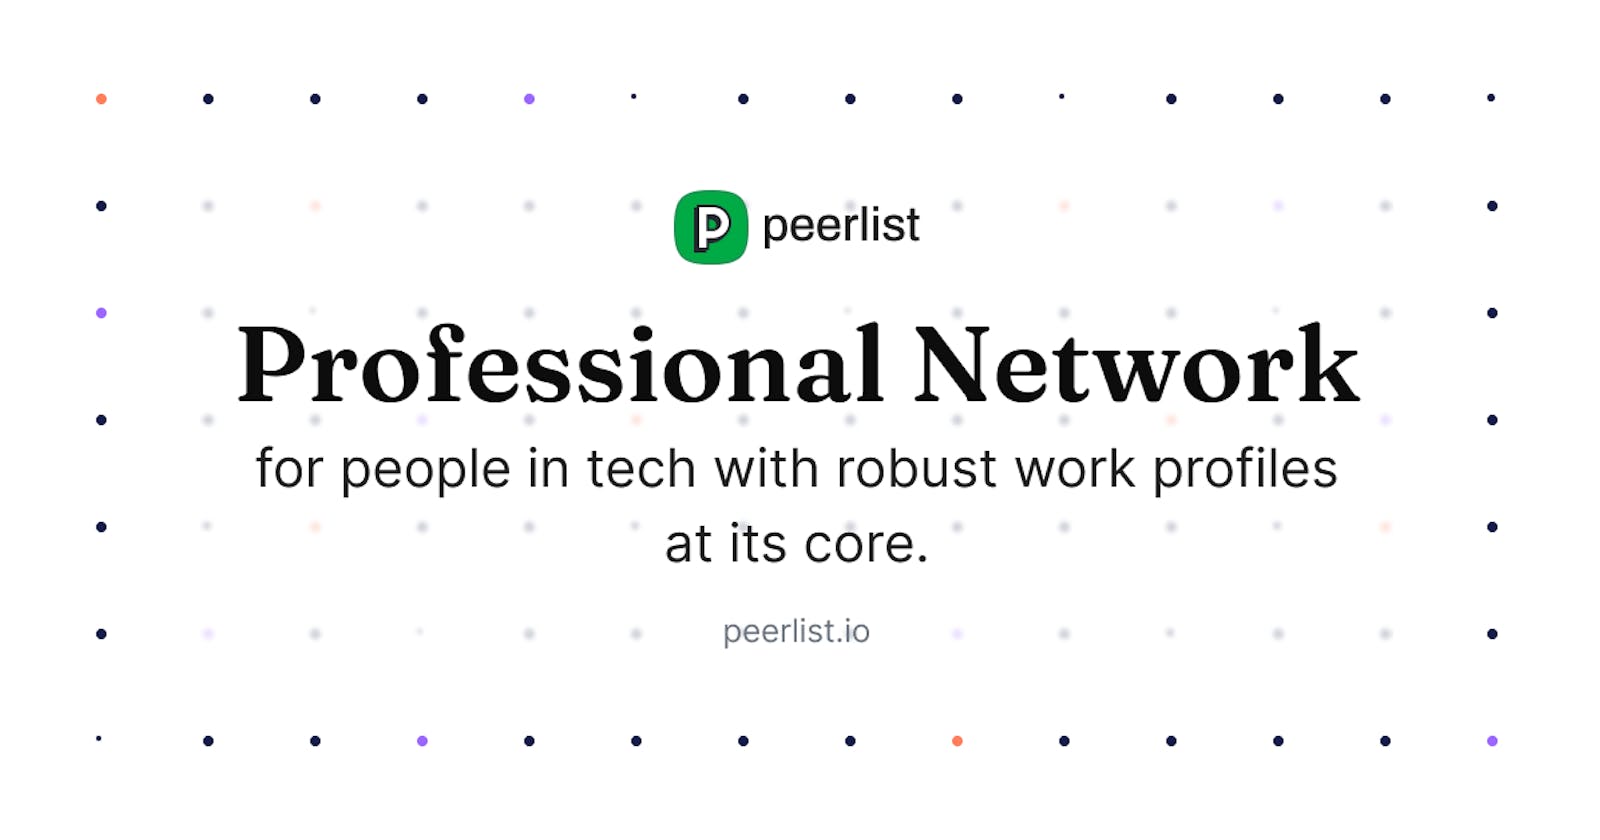 Getting started with Peerlist